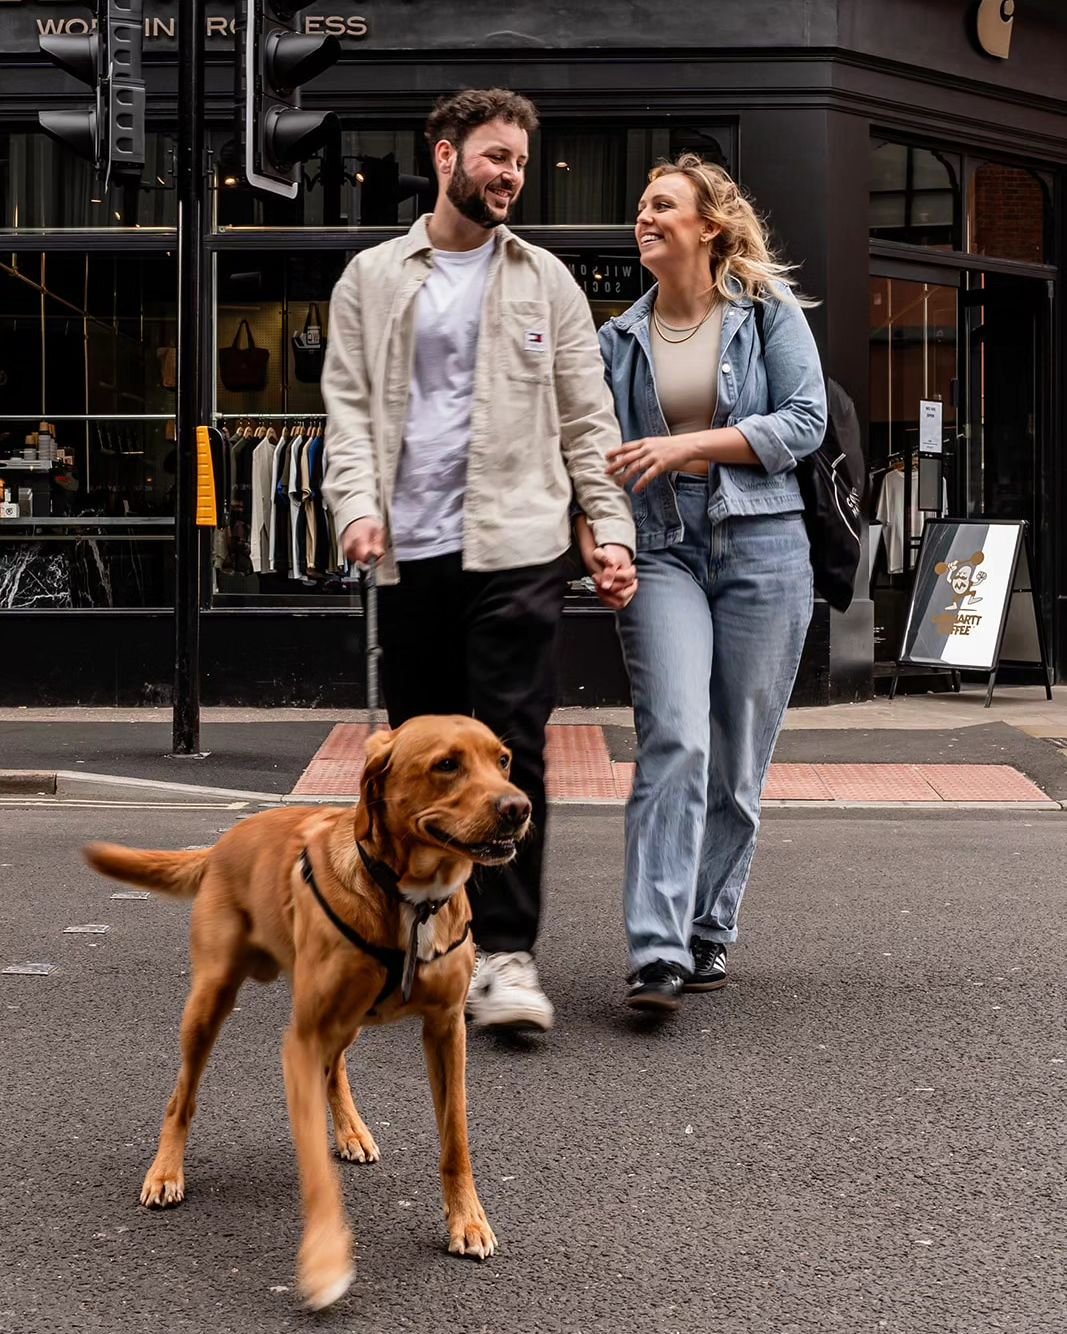 🖤 JESSICA &amp; RIKKI 🖤

And ERNIE!!! 

It was Ernie's first trip to the city &amp; he was an absolute superstar! OK, this wasn't just Ernie's shoot... but damn he's a handsome chap! 

Jess &amp; Rikki were my first couple shoot of the day in Manch